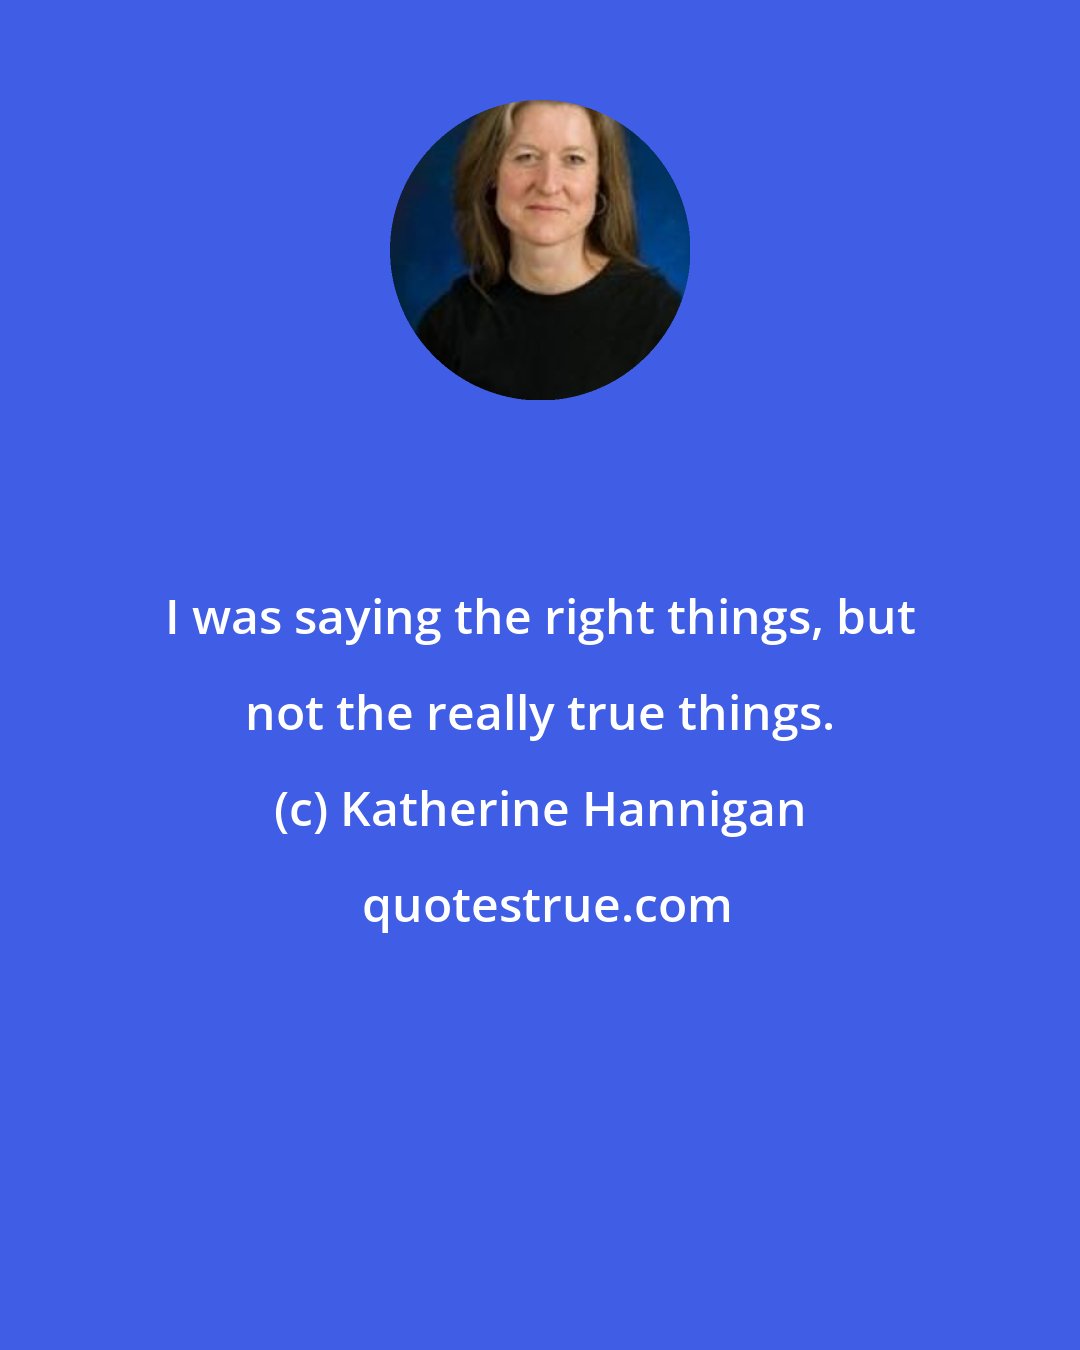 Katherine Hannigan: I was saying the right things, but not the really true things.